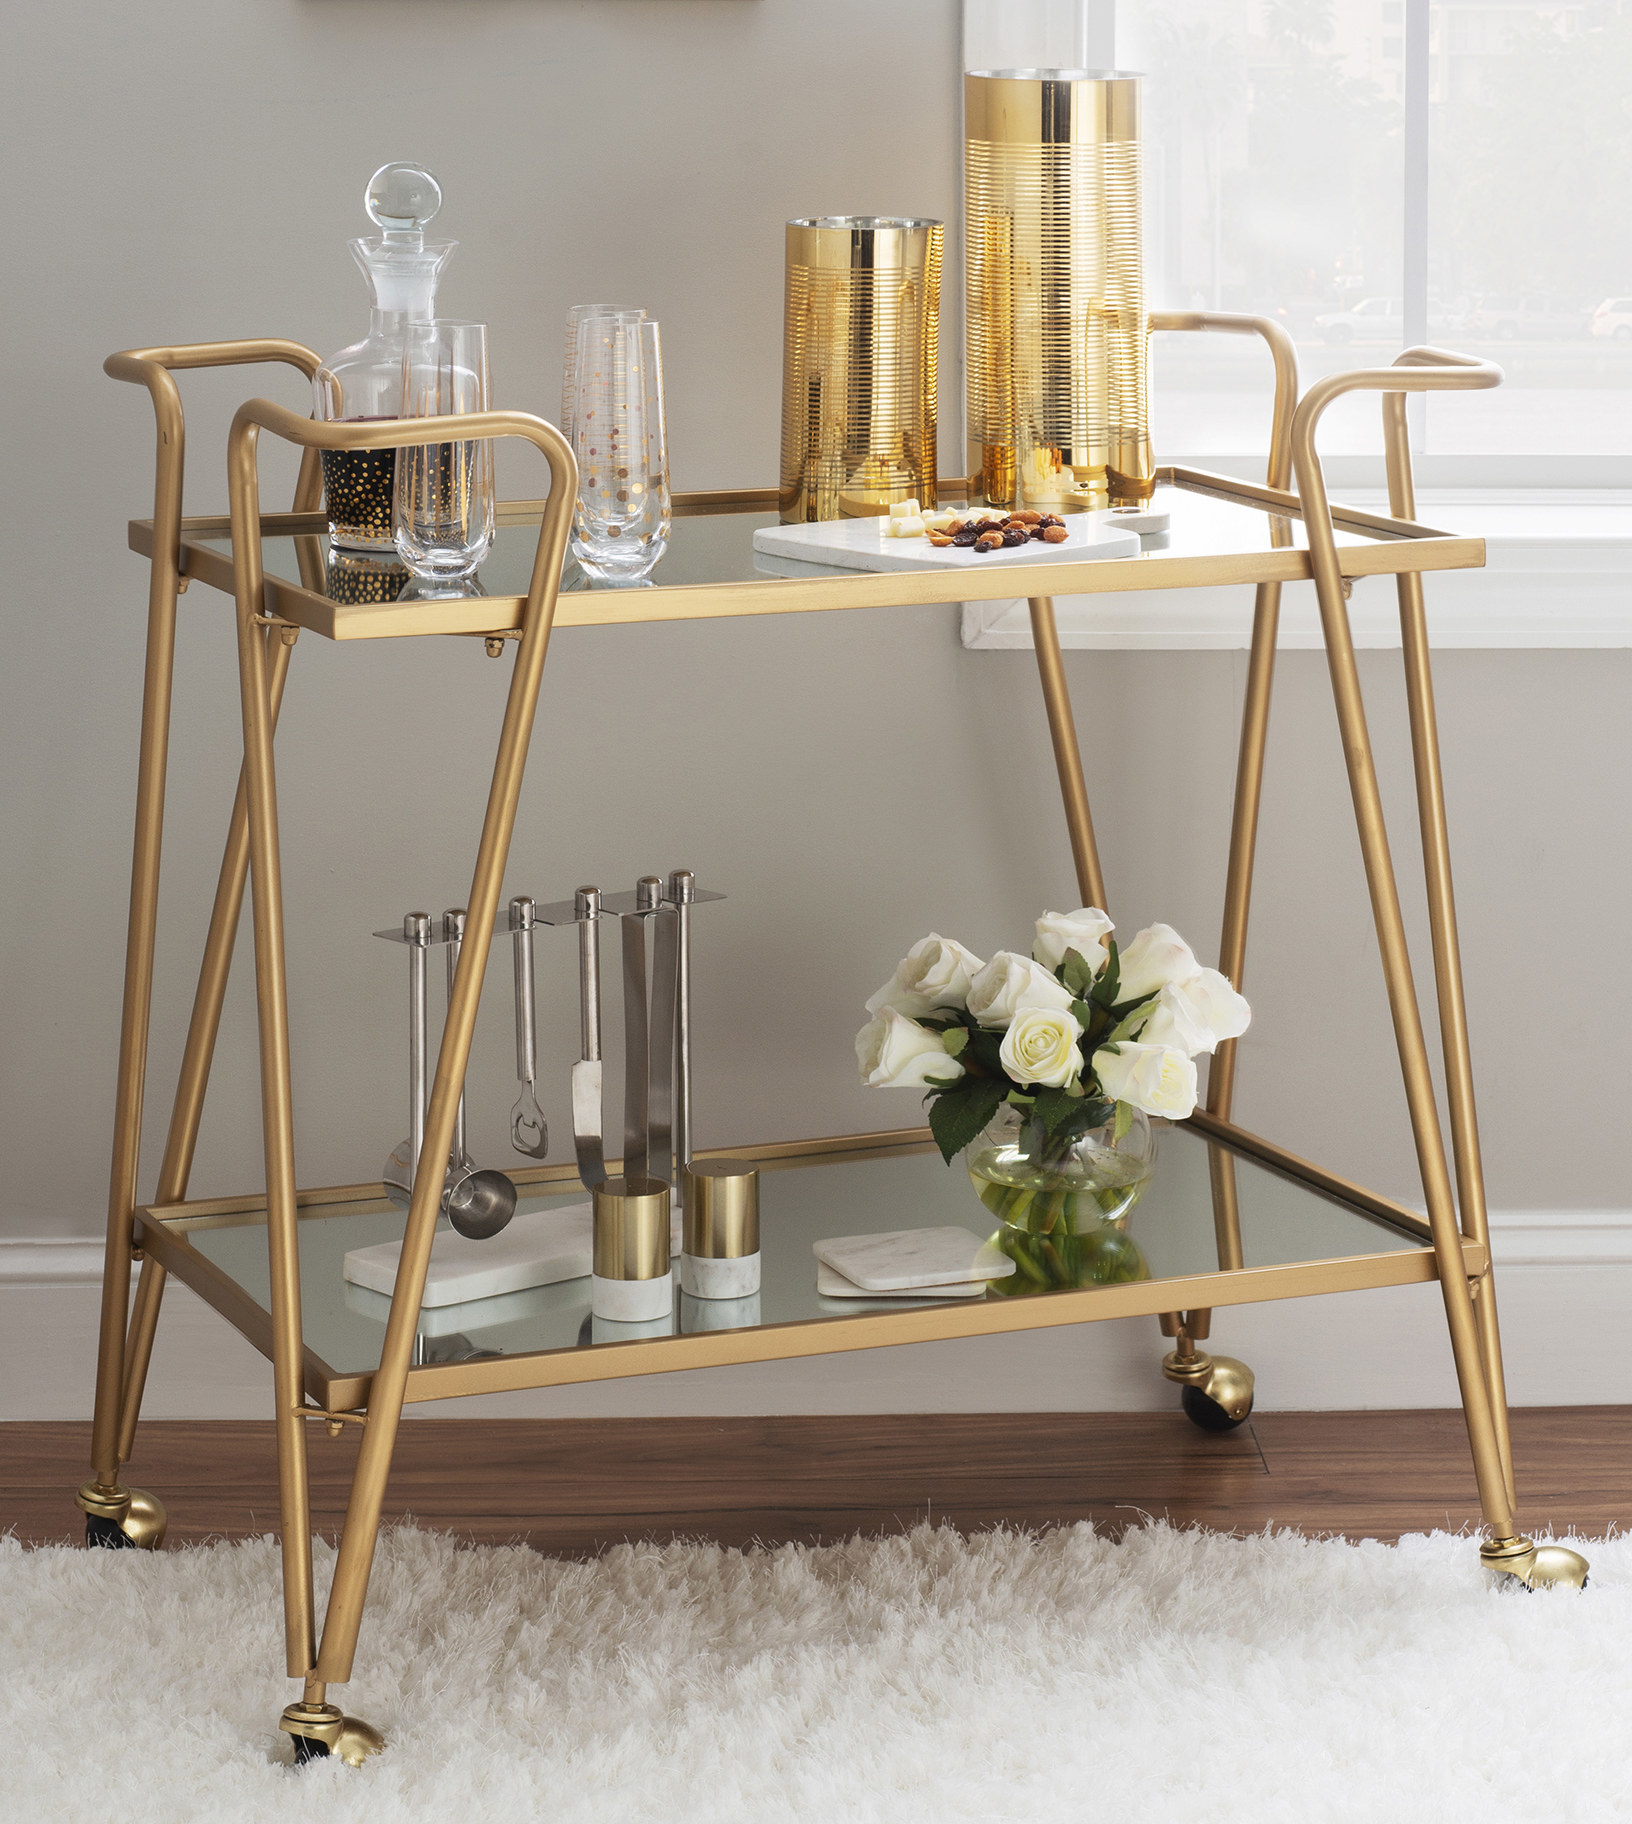 Gold bar cart holding glassware, accessories and flowers.